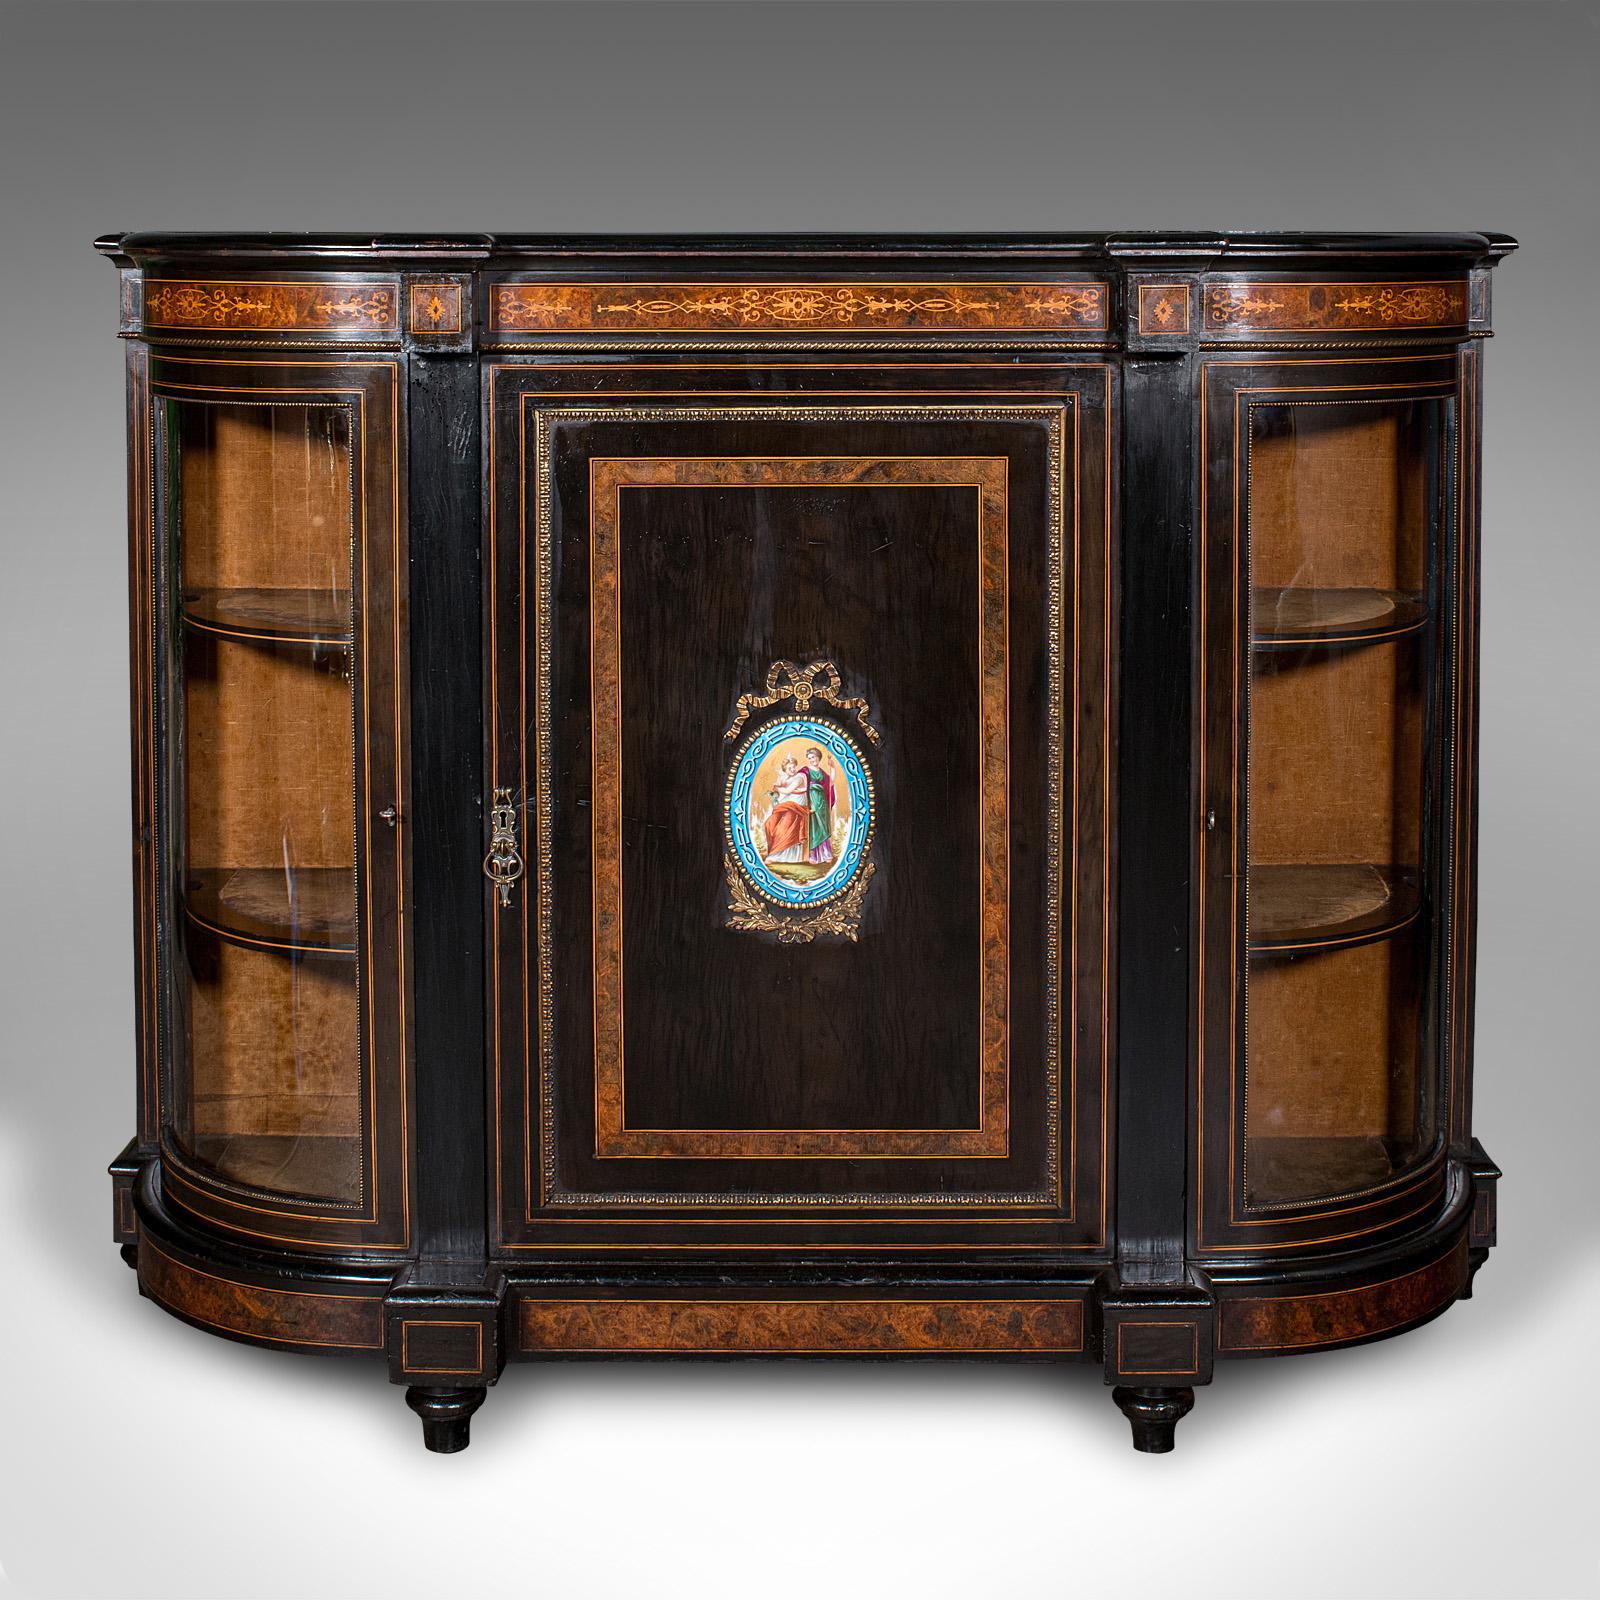 This is an antique drawing room credenza. An English, ebonised walnut and glass display cabinet, dating to the early Victorian period, circa 1850.

Mid-19th century decadence, with an exquisite appearance throughout
Displays a desirable aged patina